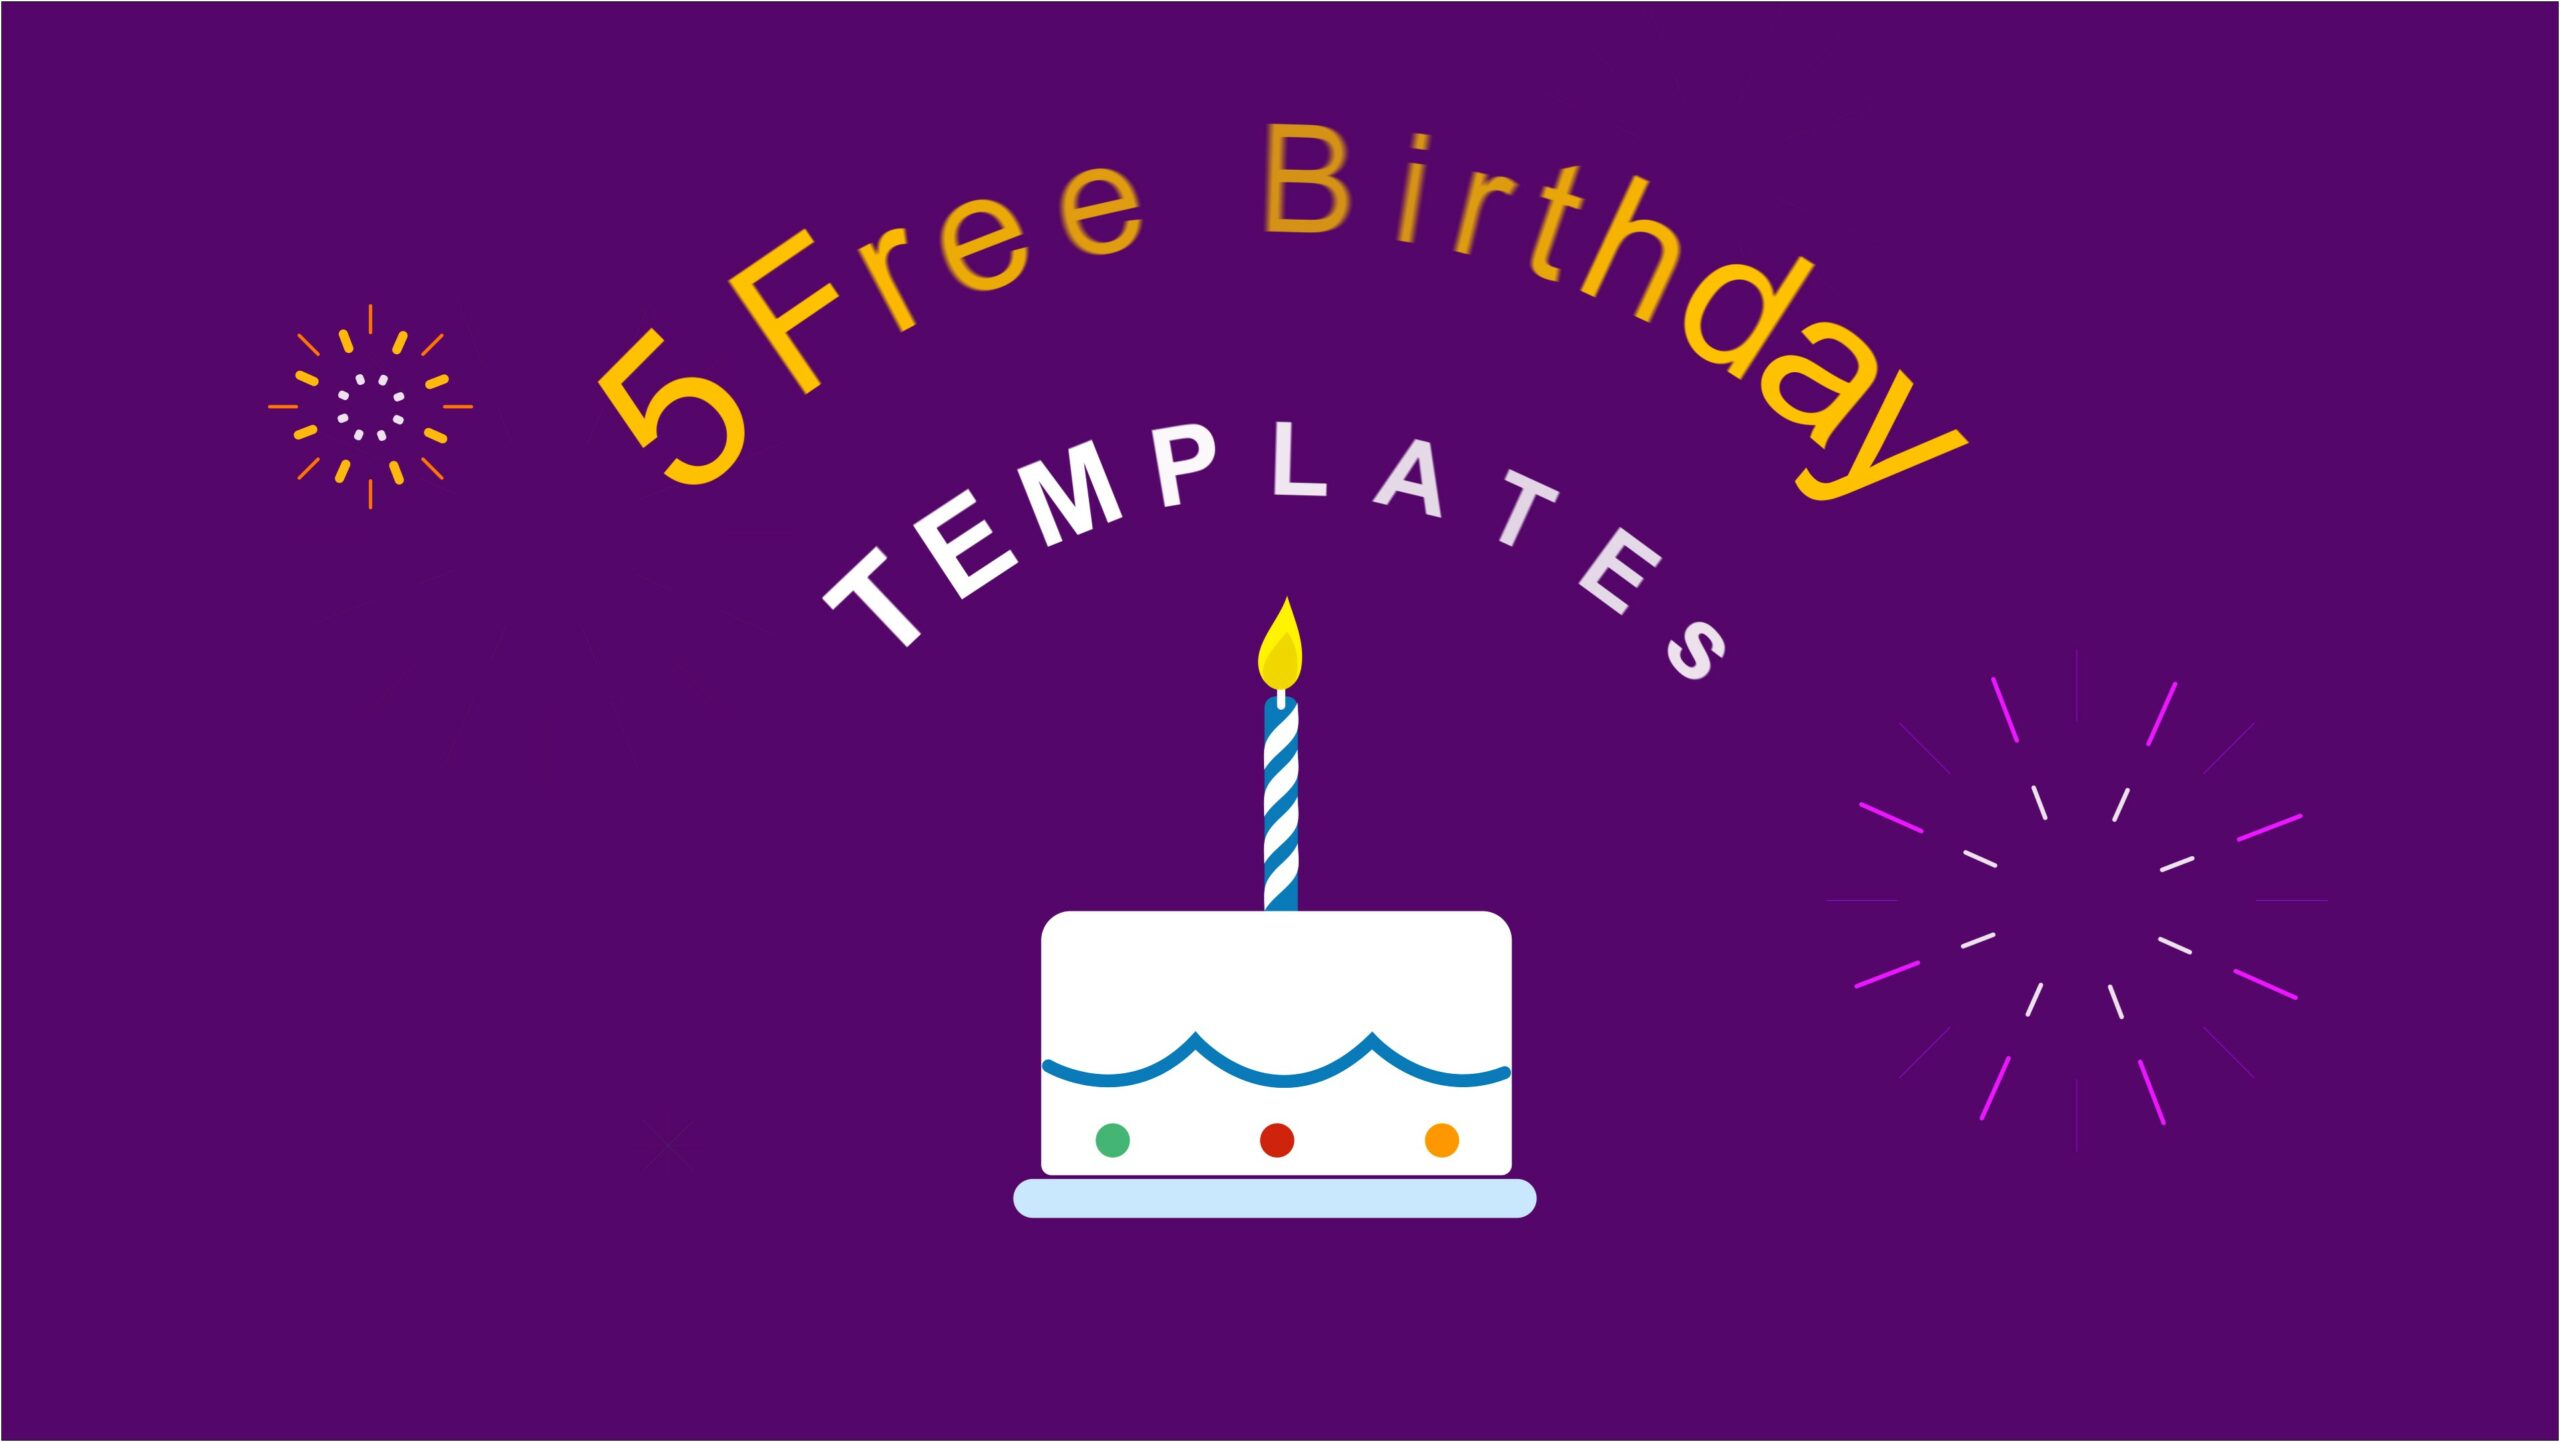 Adobe After Effects Happy Birthday Template Free